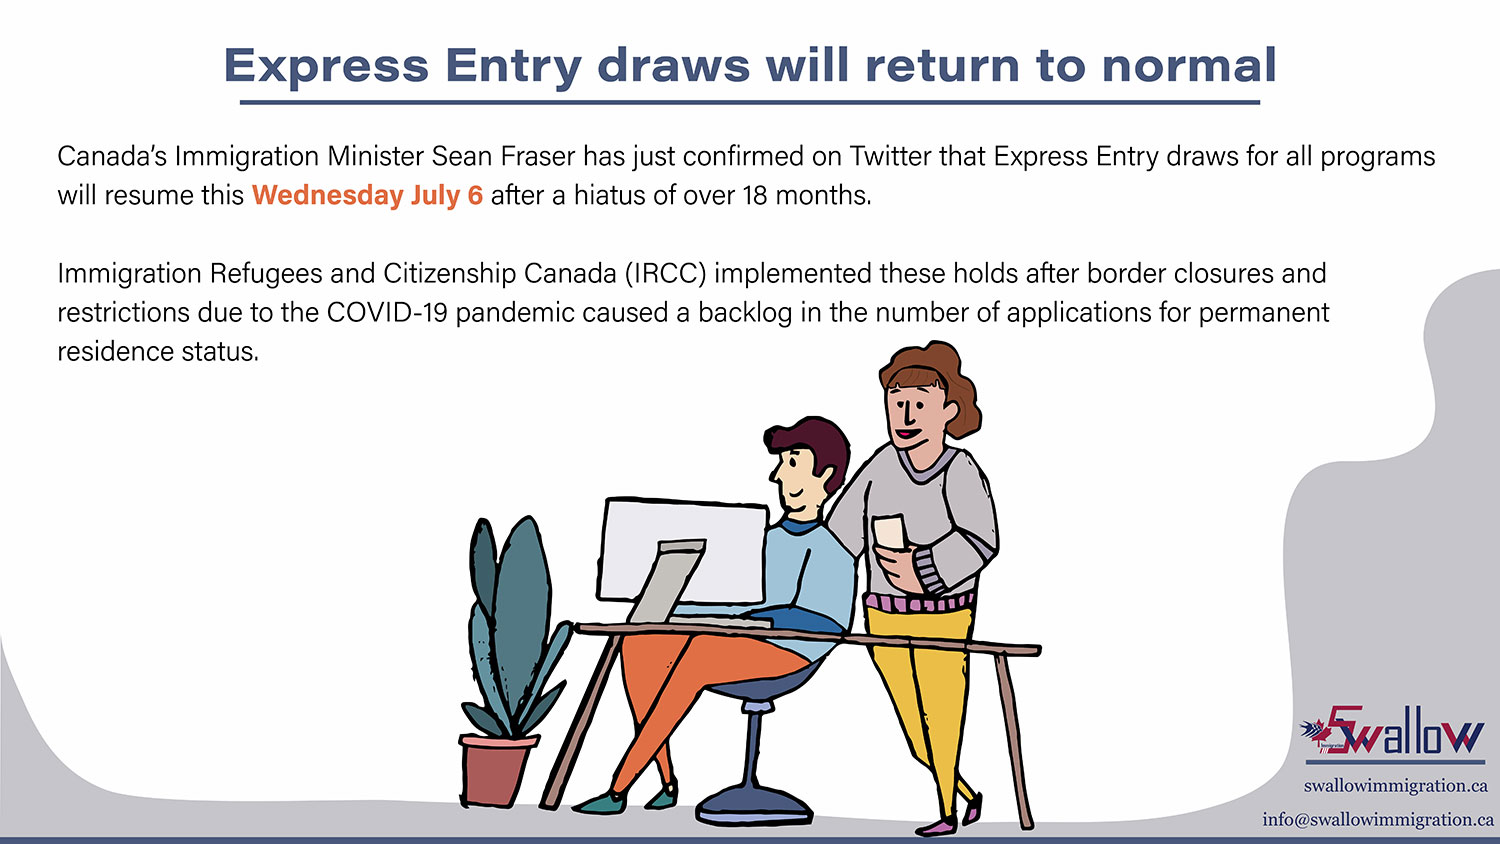 Express Entry draws will return to normal